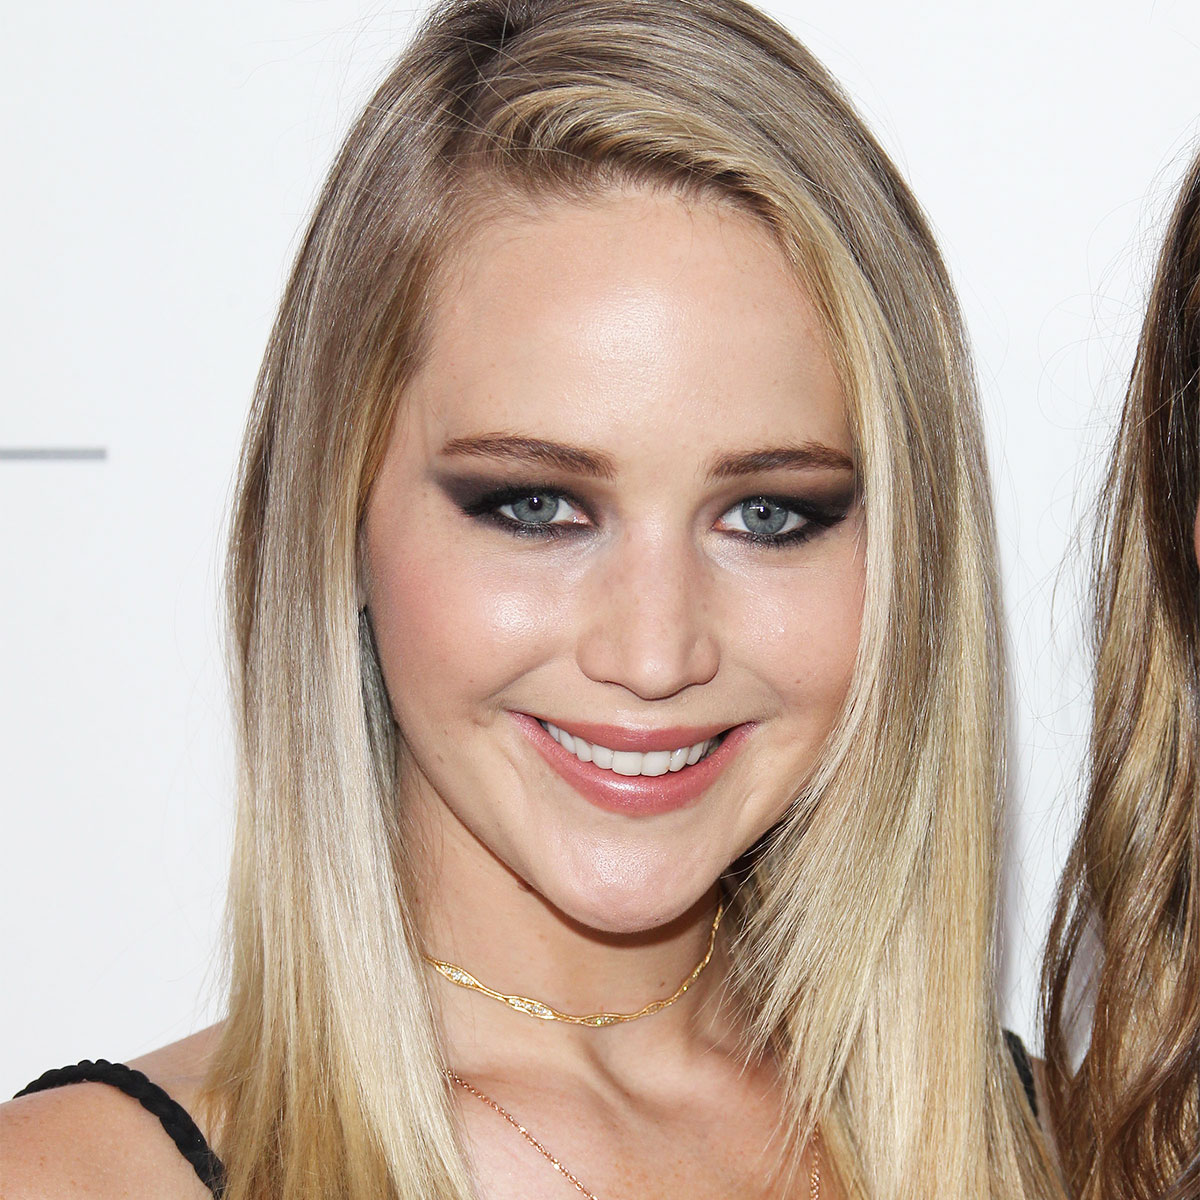 Jennifer Lawrence Stripped Off Her Makeup In Public And Proved She’s A Natural Beauty